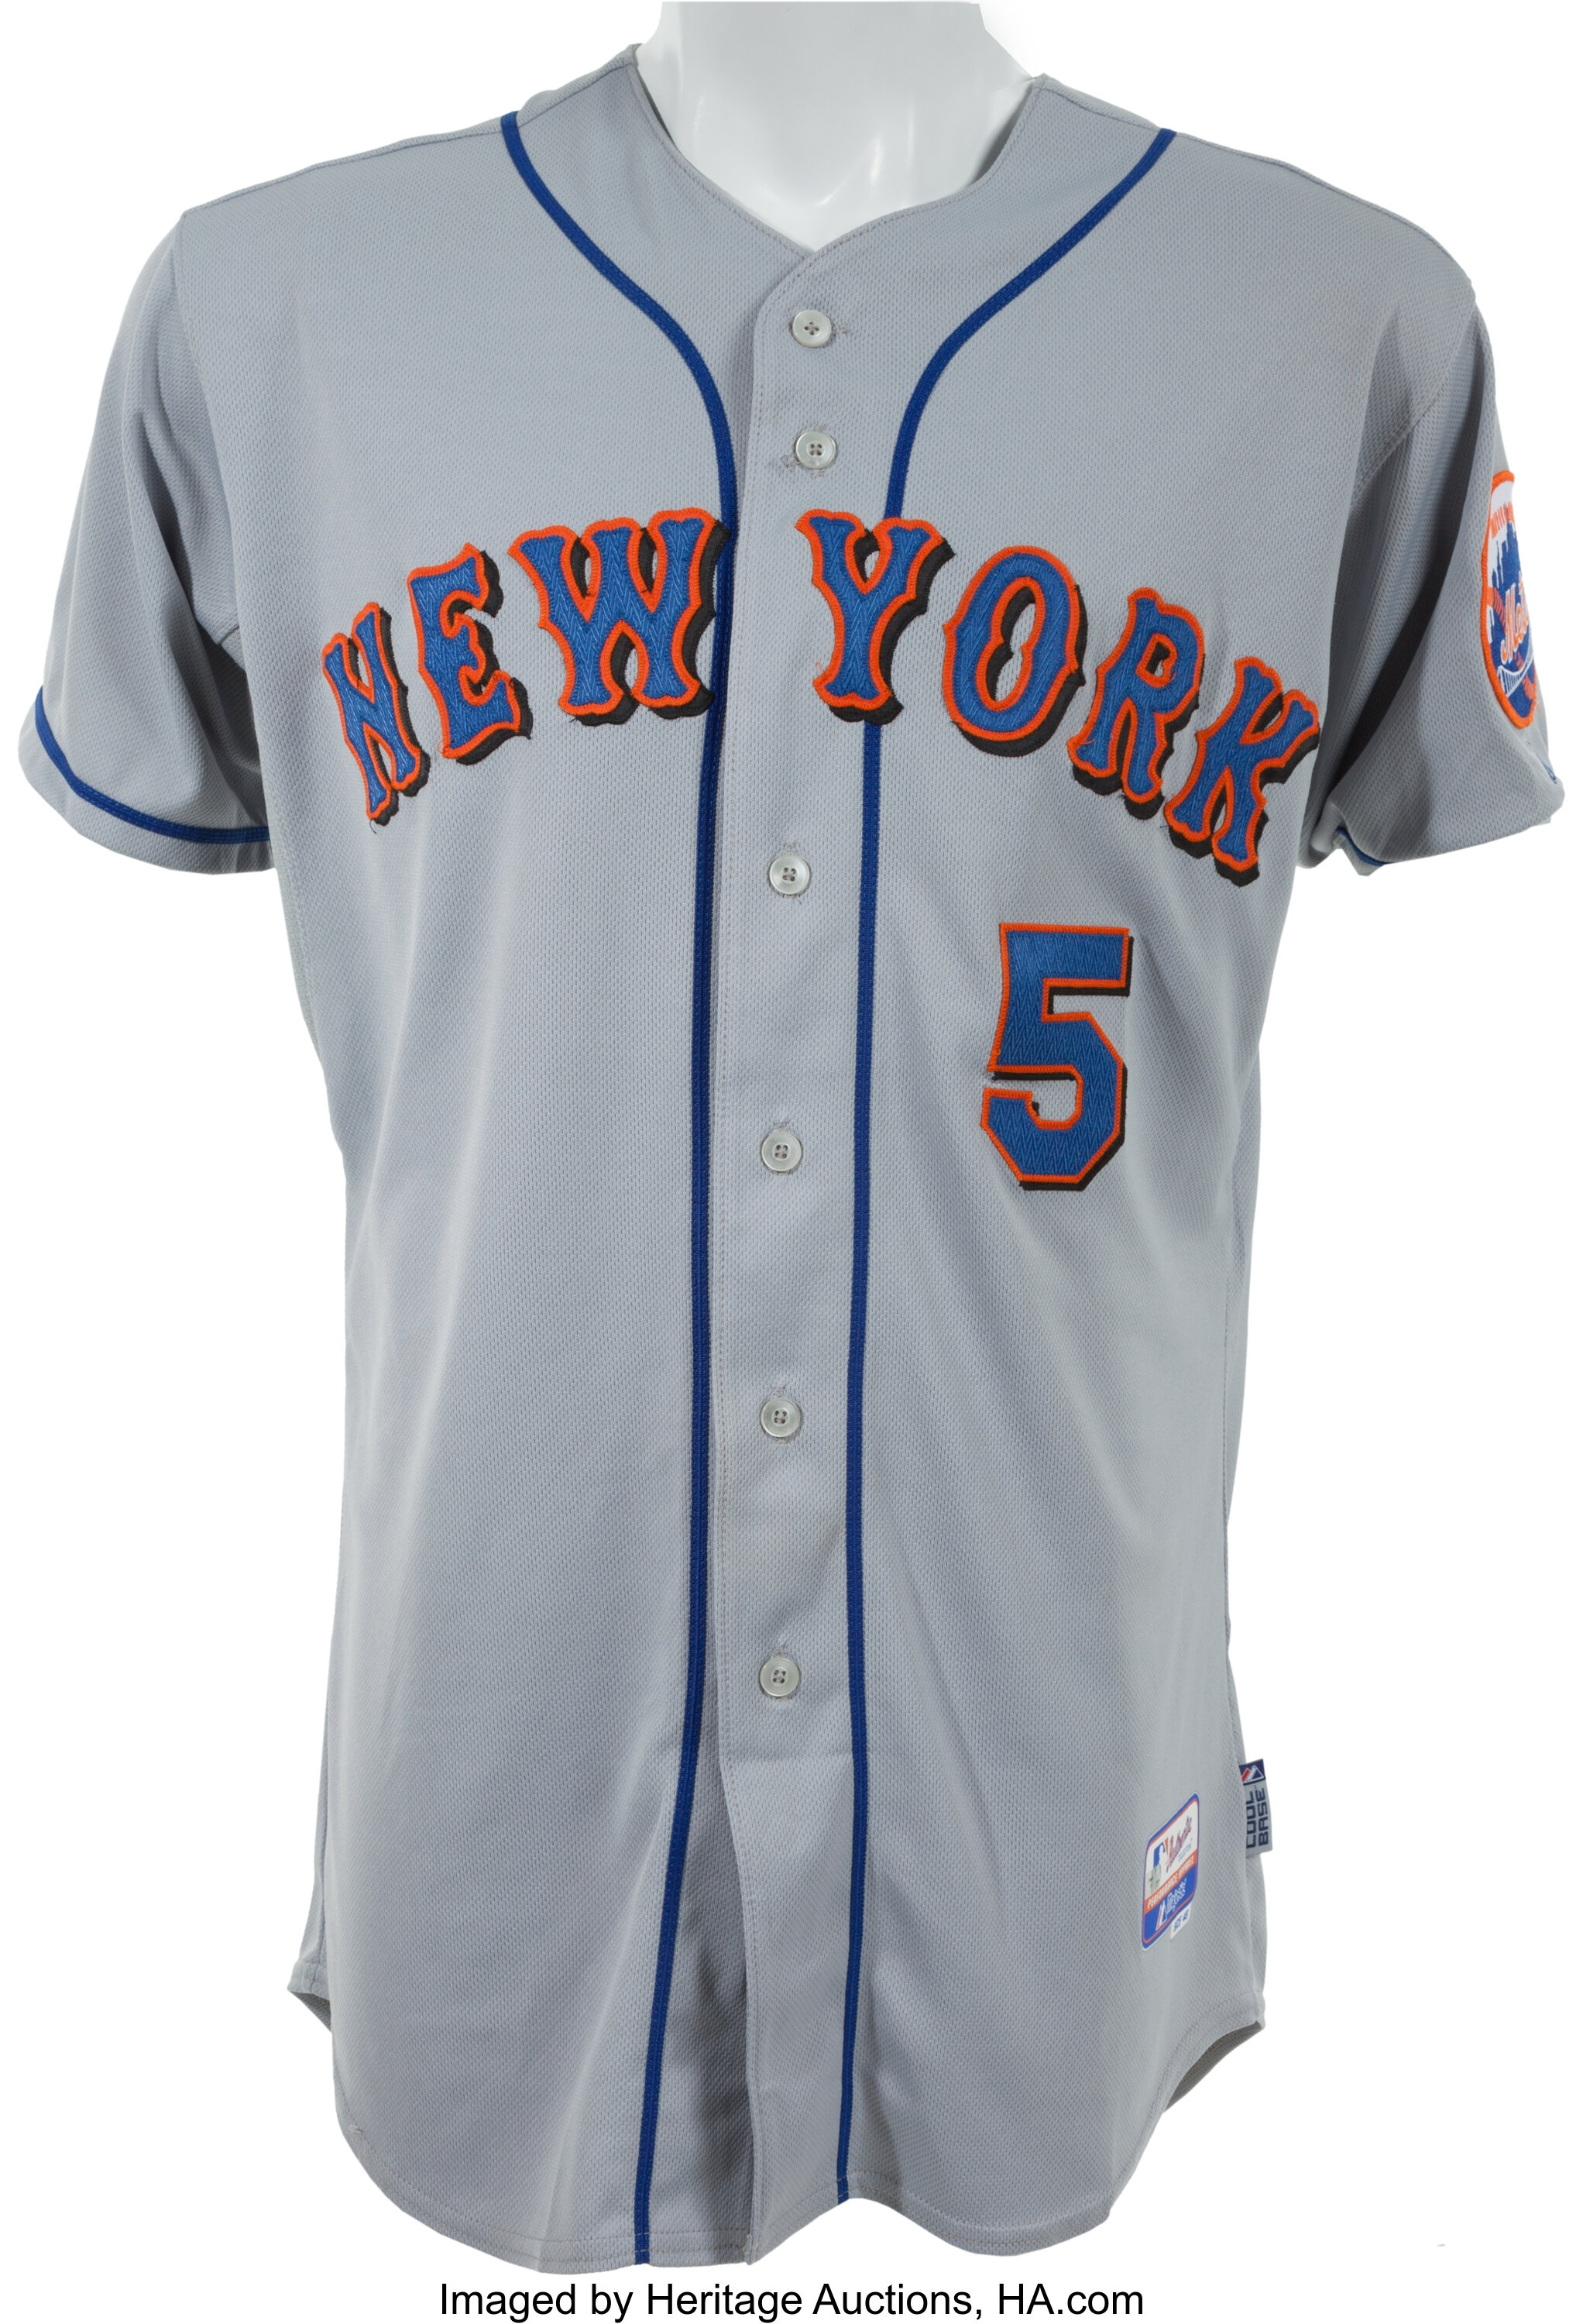 new york mets jersey, new york mets jersey Suppliers and Manufacturers at